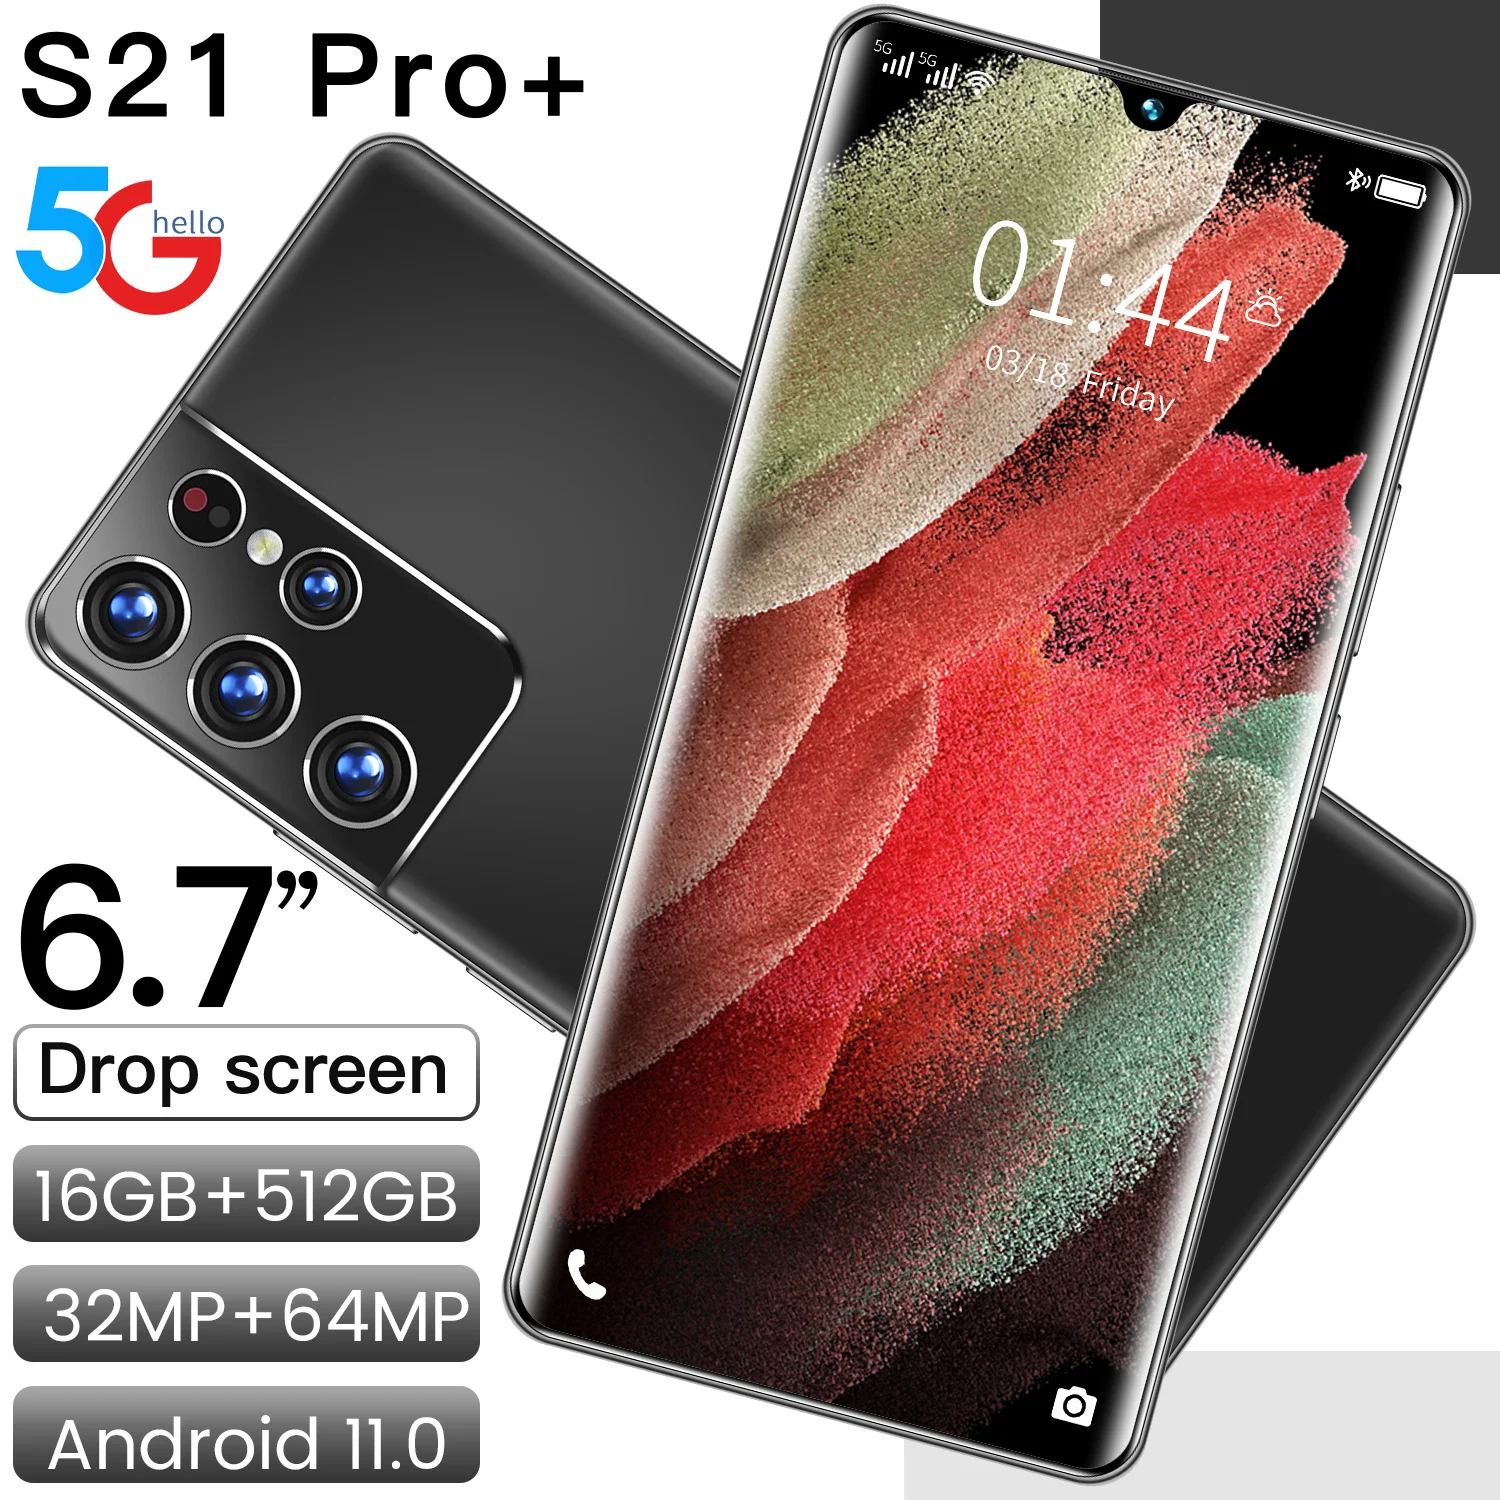 

2021Global Version S21 Pro+ Android 11 Smartphone 6.7-Inch 6000mAh Full Screen Deca Core 16GB 512GB 4G LTE 5G Network Cellphones